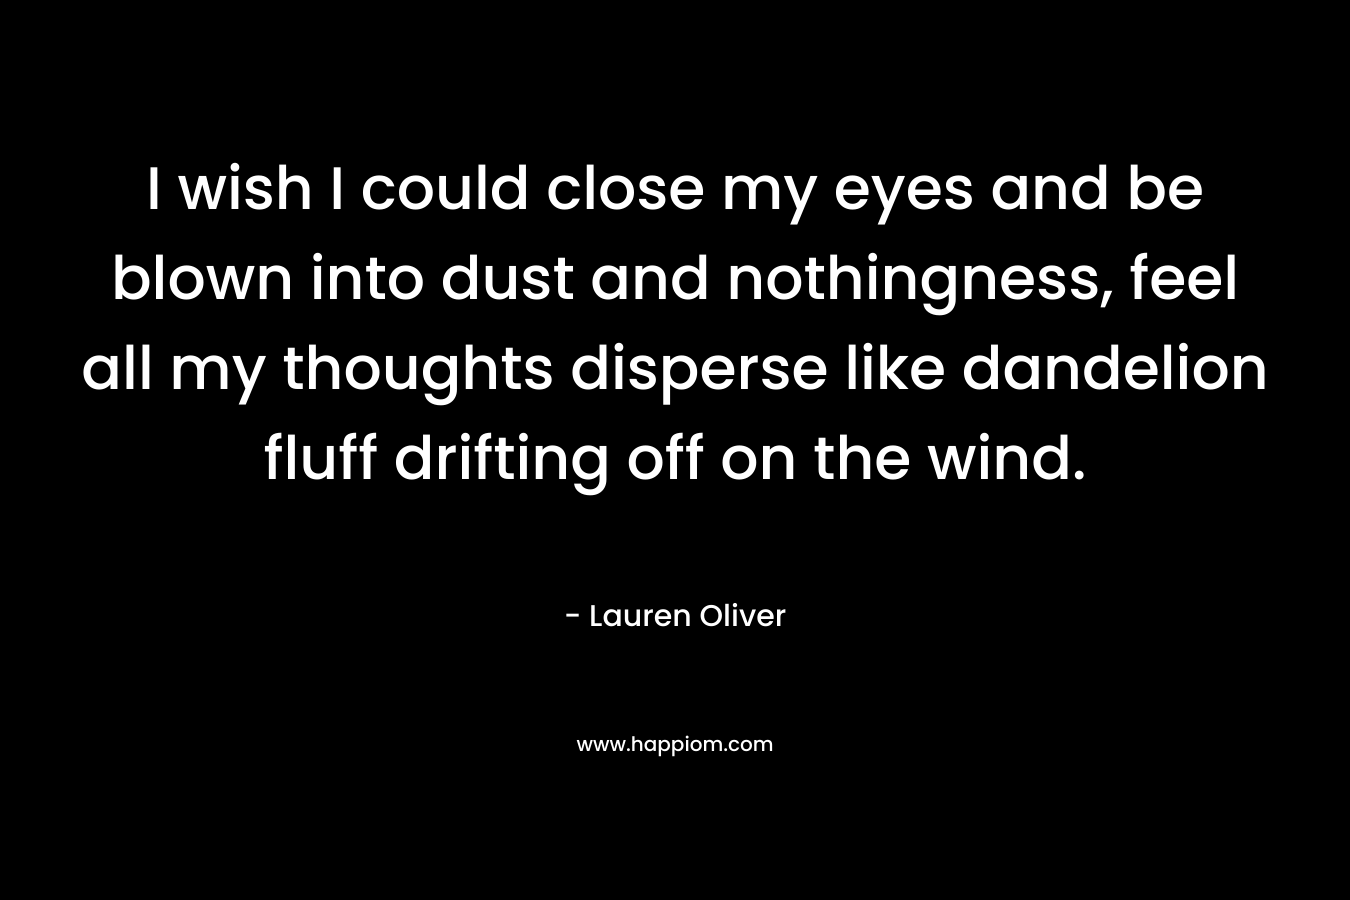 I wish I could close my eyes and be blown into dust and nothingness, feel all my thoughts disperse like dandelion fluff drifting off on the wind. – Lauren Oliver